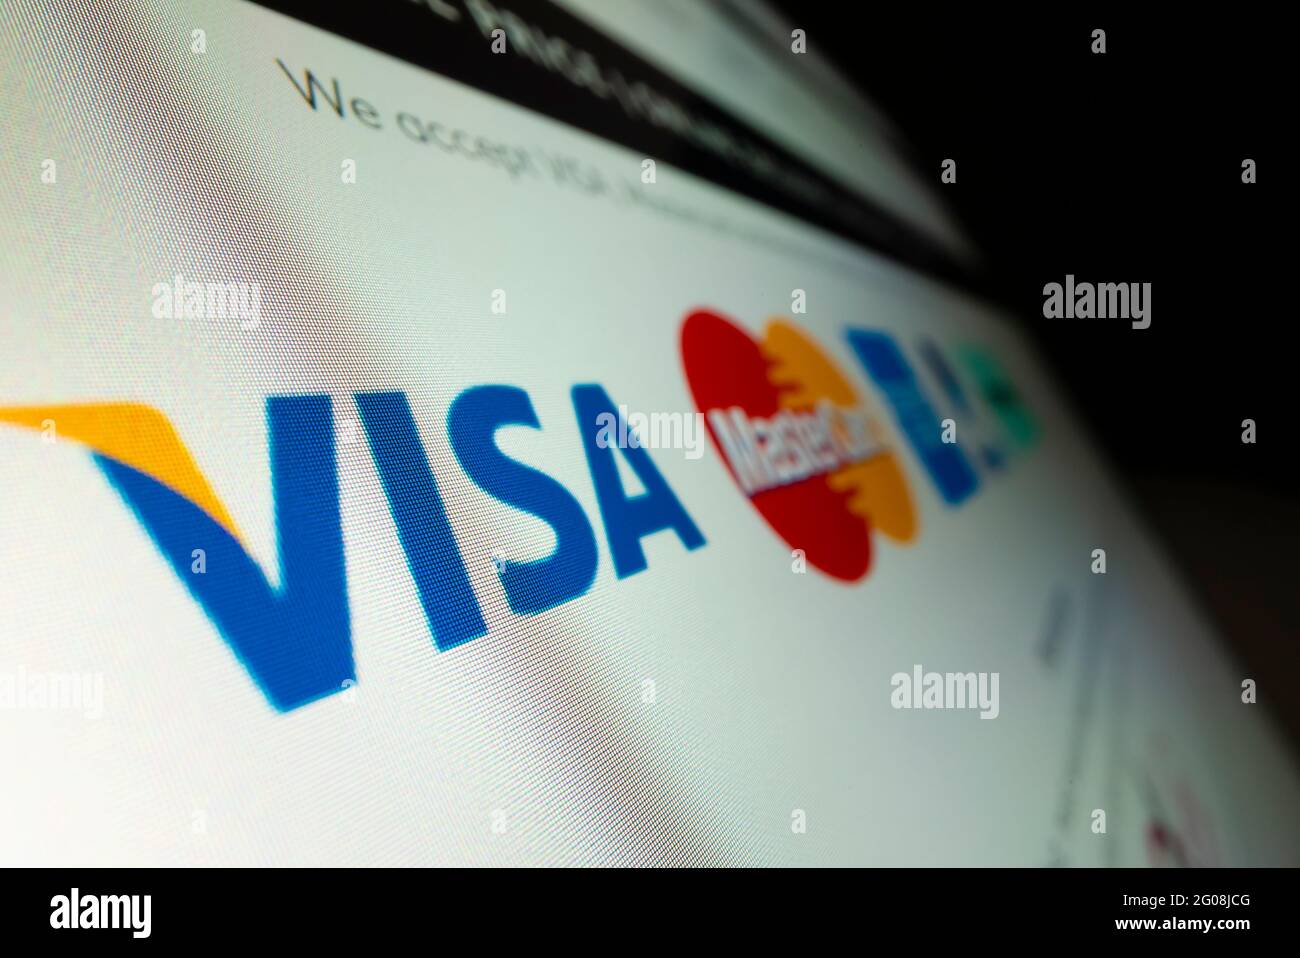 Close-up view of Visa logo on online shopping website Stock Photo